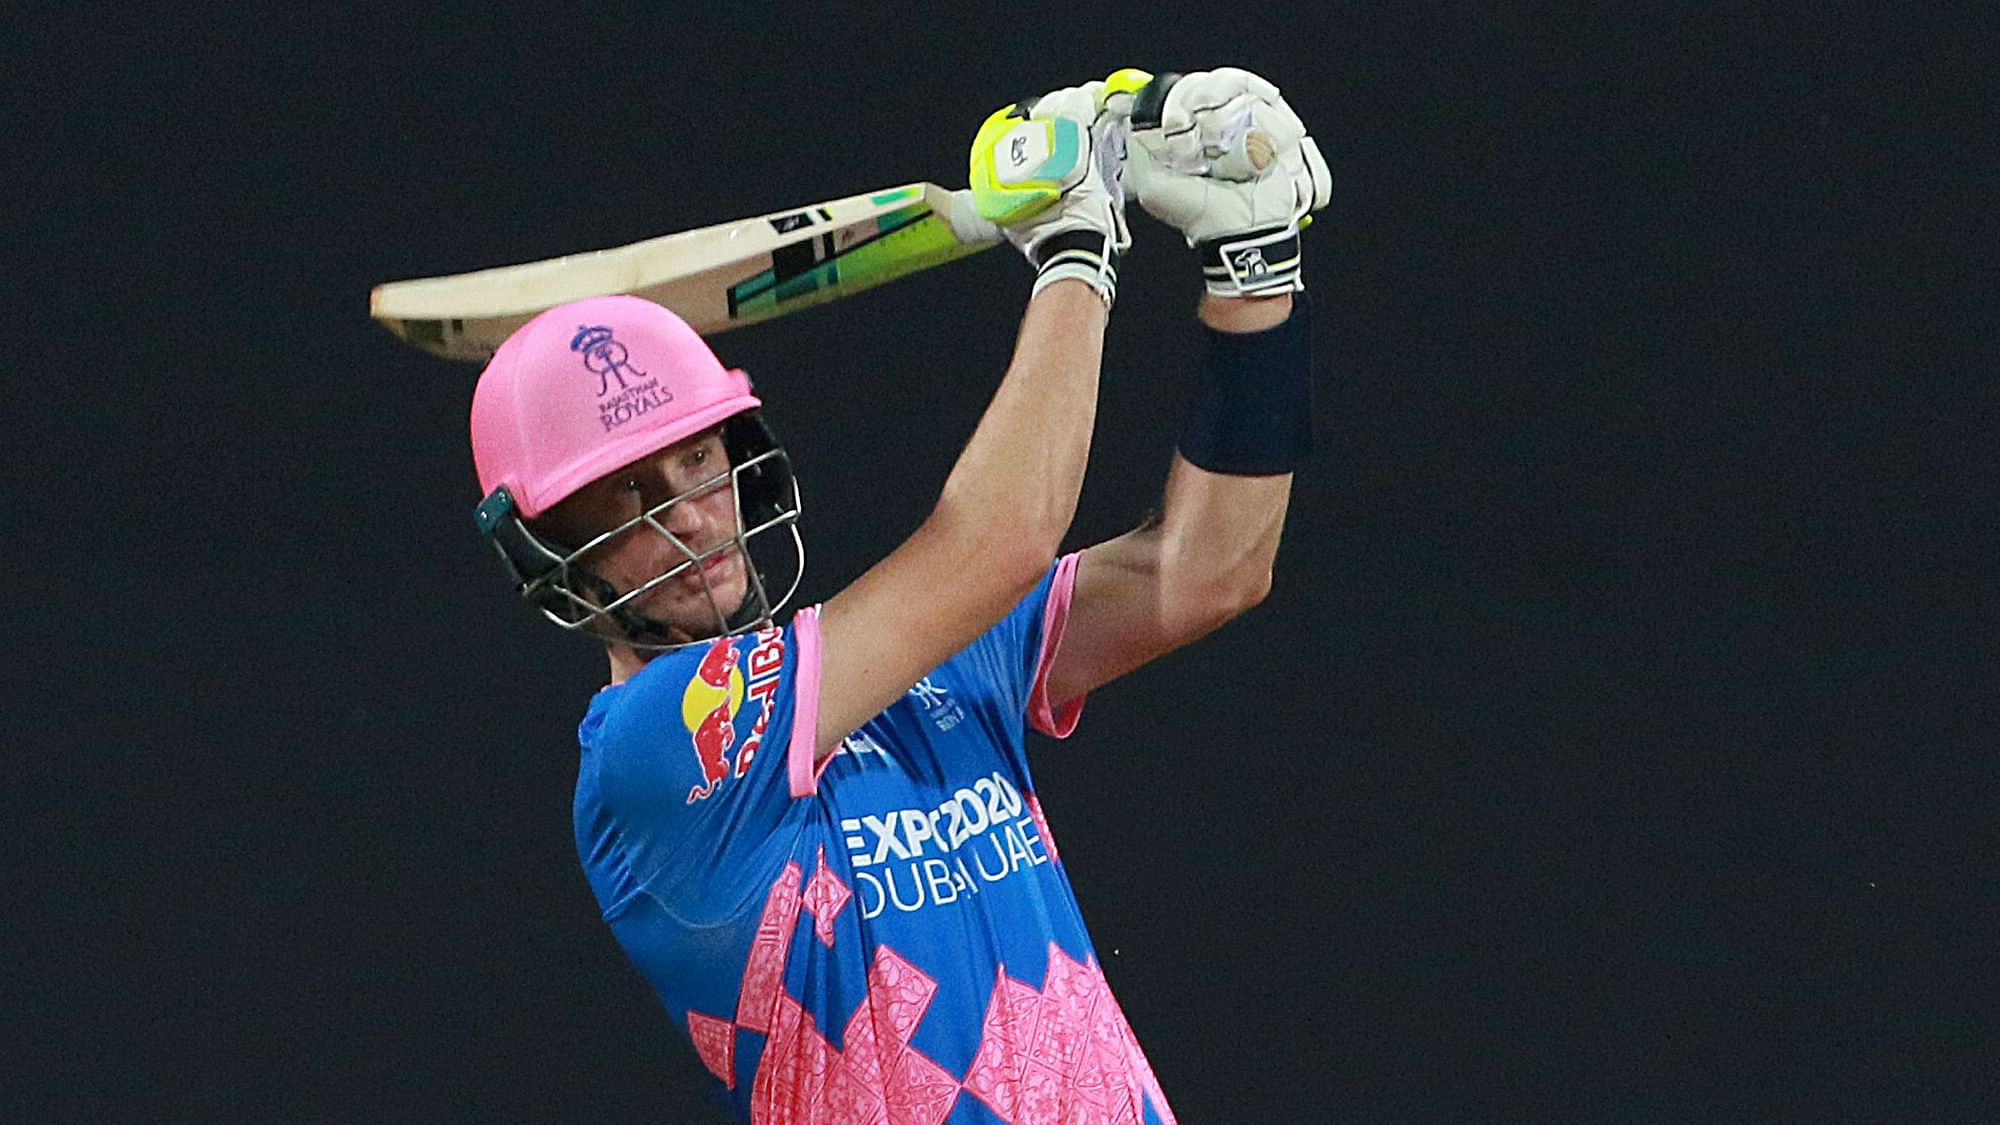 Rajasthan Royals have beaten Delhi Capitals by 3 wickets on Thursday night in the IPL.